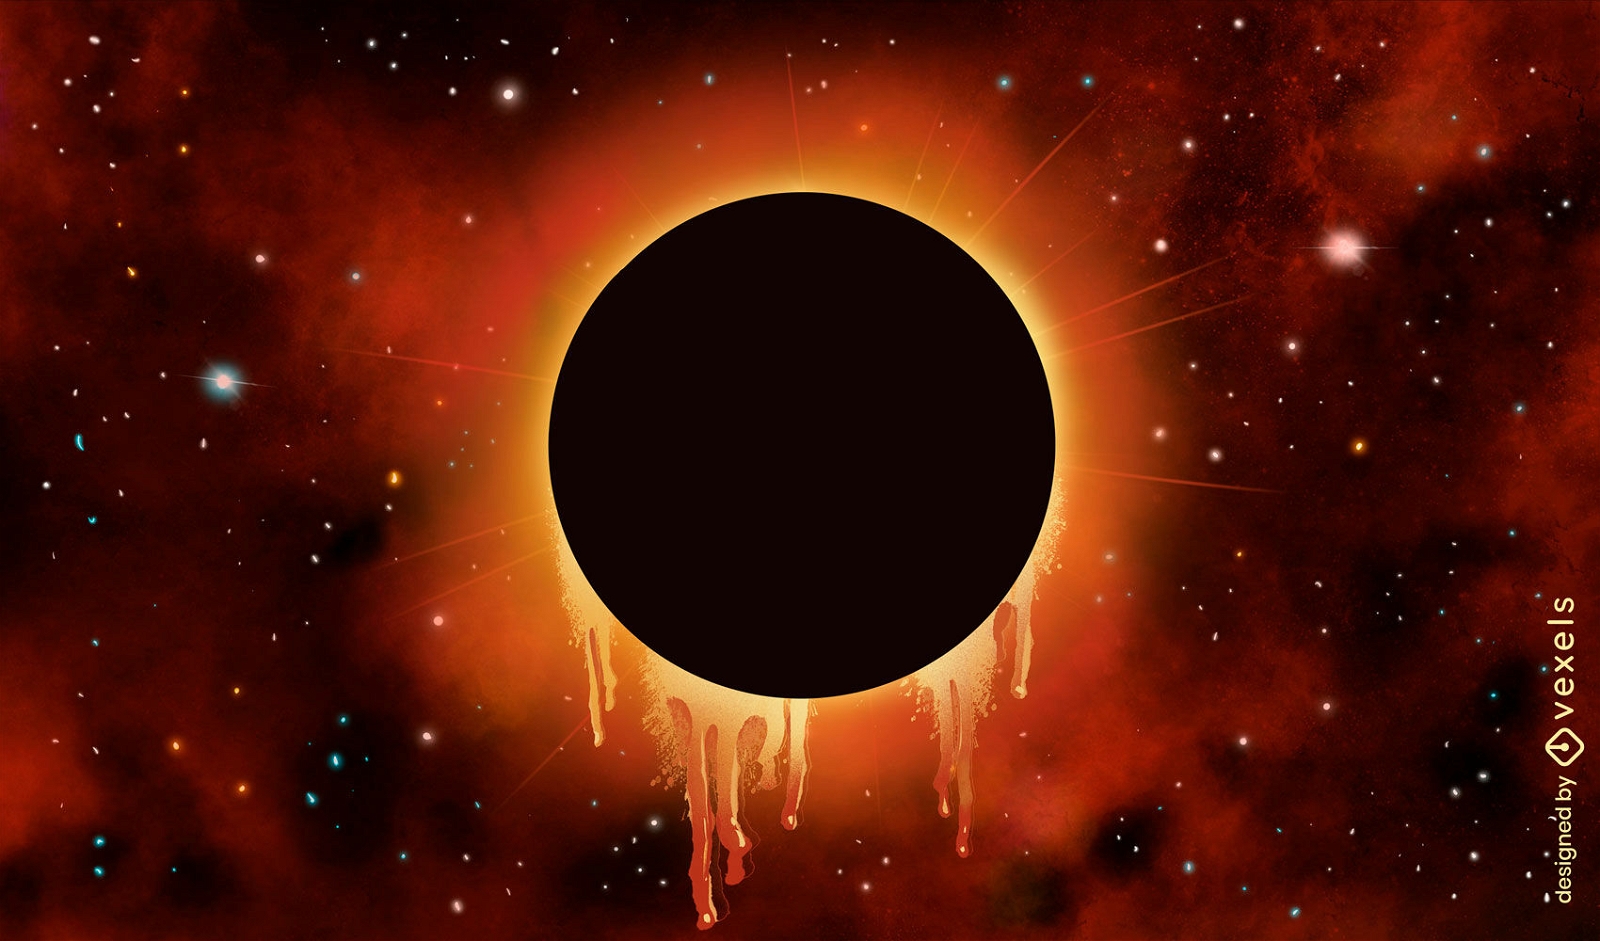 Solar eclipse in space illustration background